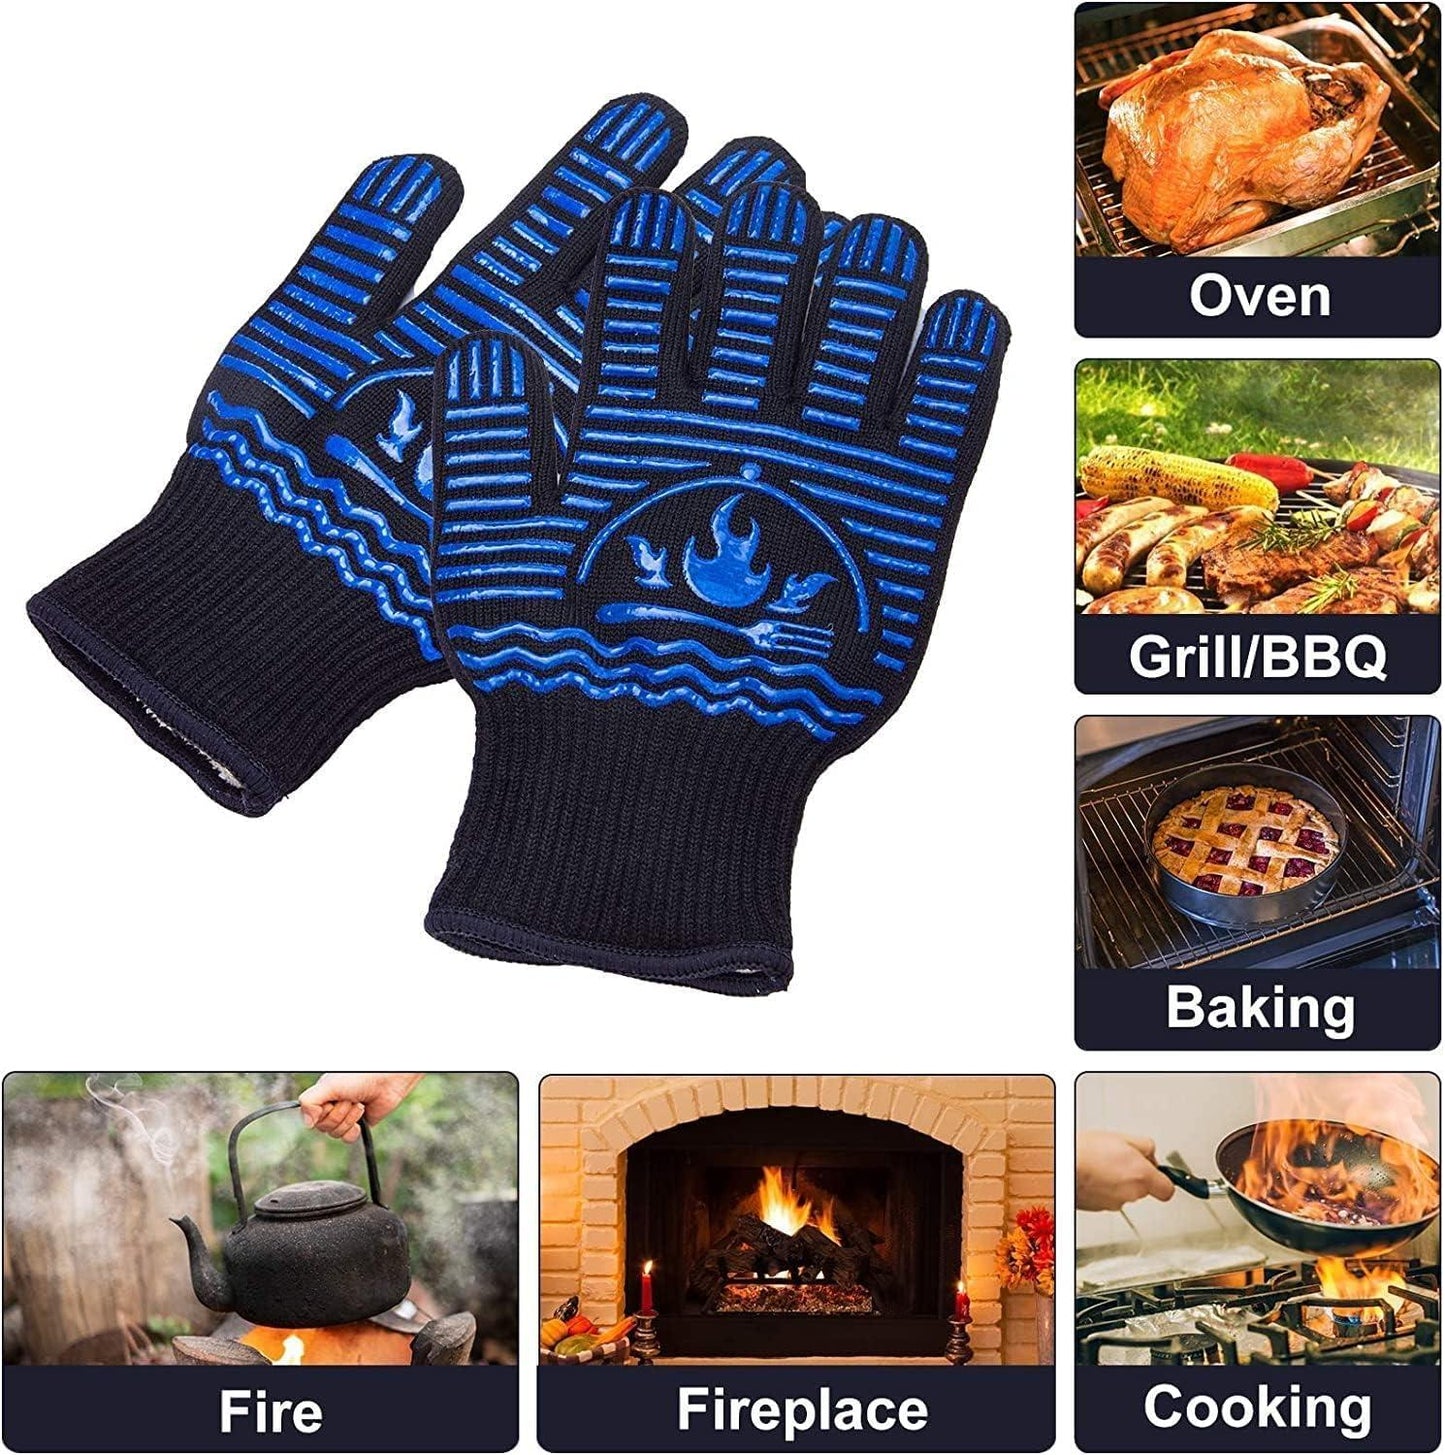 Recoty BBQ Gloves, 1472°F Extreme Heat Resistant Grill Gloves, Non-Slip Food Grade Silicone Oven Mitts Gloves for Kitchen, Cooking, Barbecue, Baking, Smoker (11inch) - CookCave